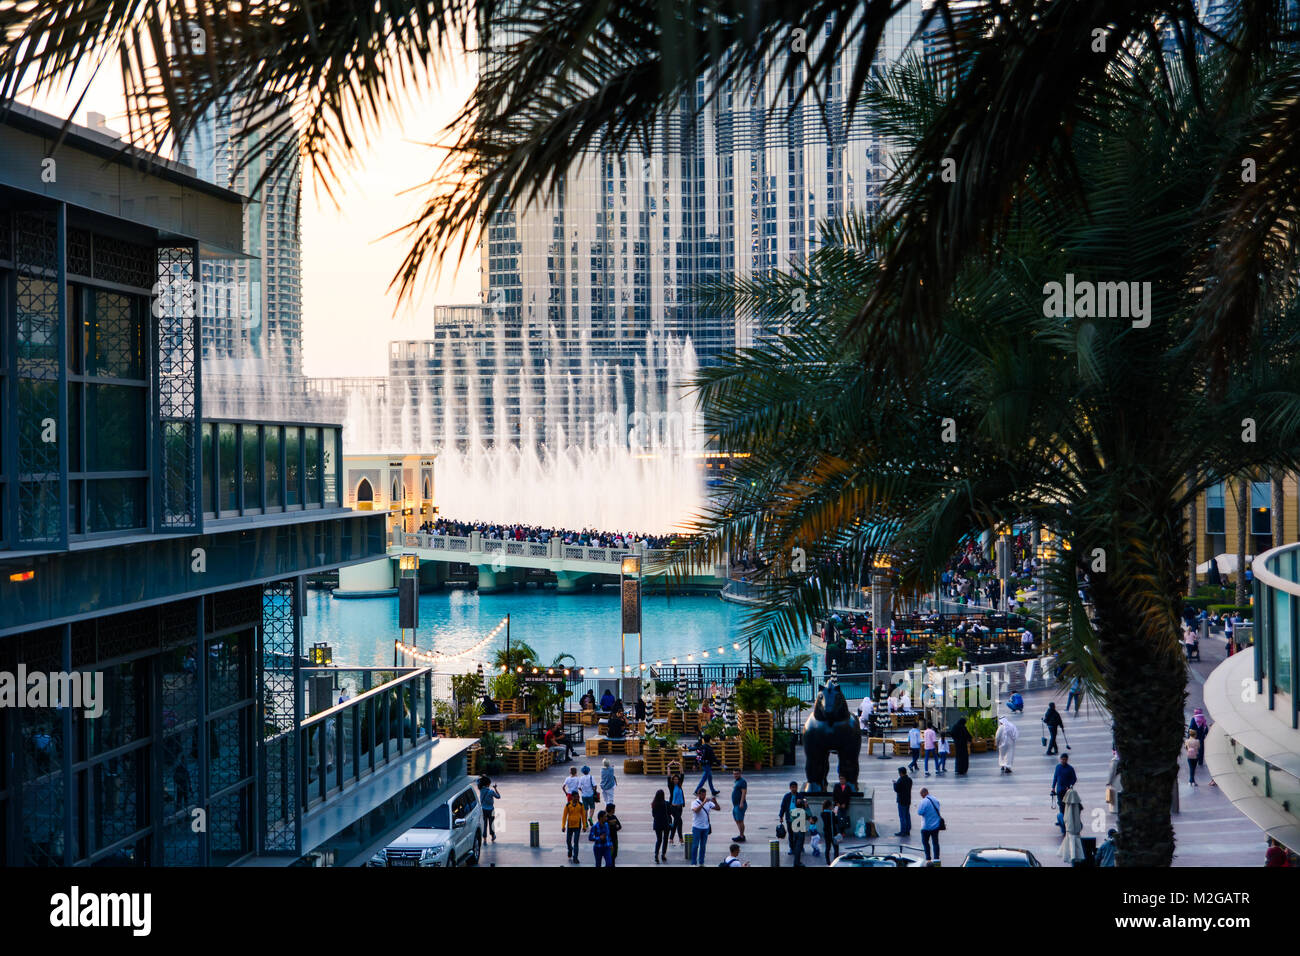 DUBAI, UNITED ARAB EMIRATES - FEBRUARY 5, 2018: Crowd gathers around the Dubai mall fountain to see the water show which attracts many tourist every d Stock Photo